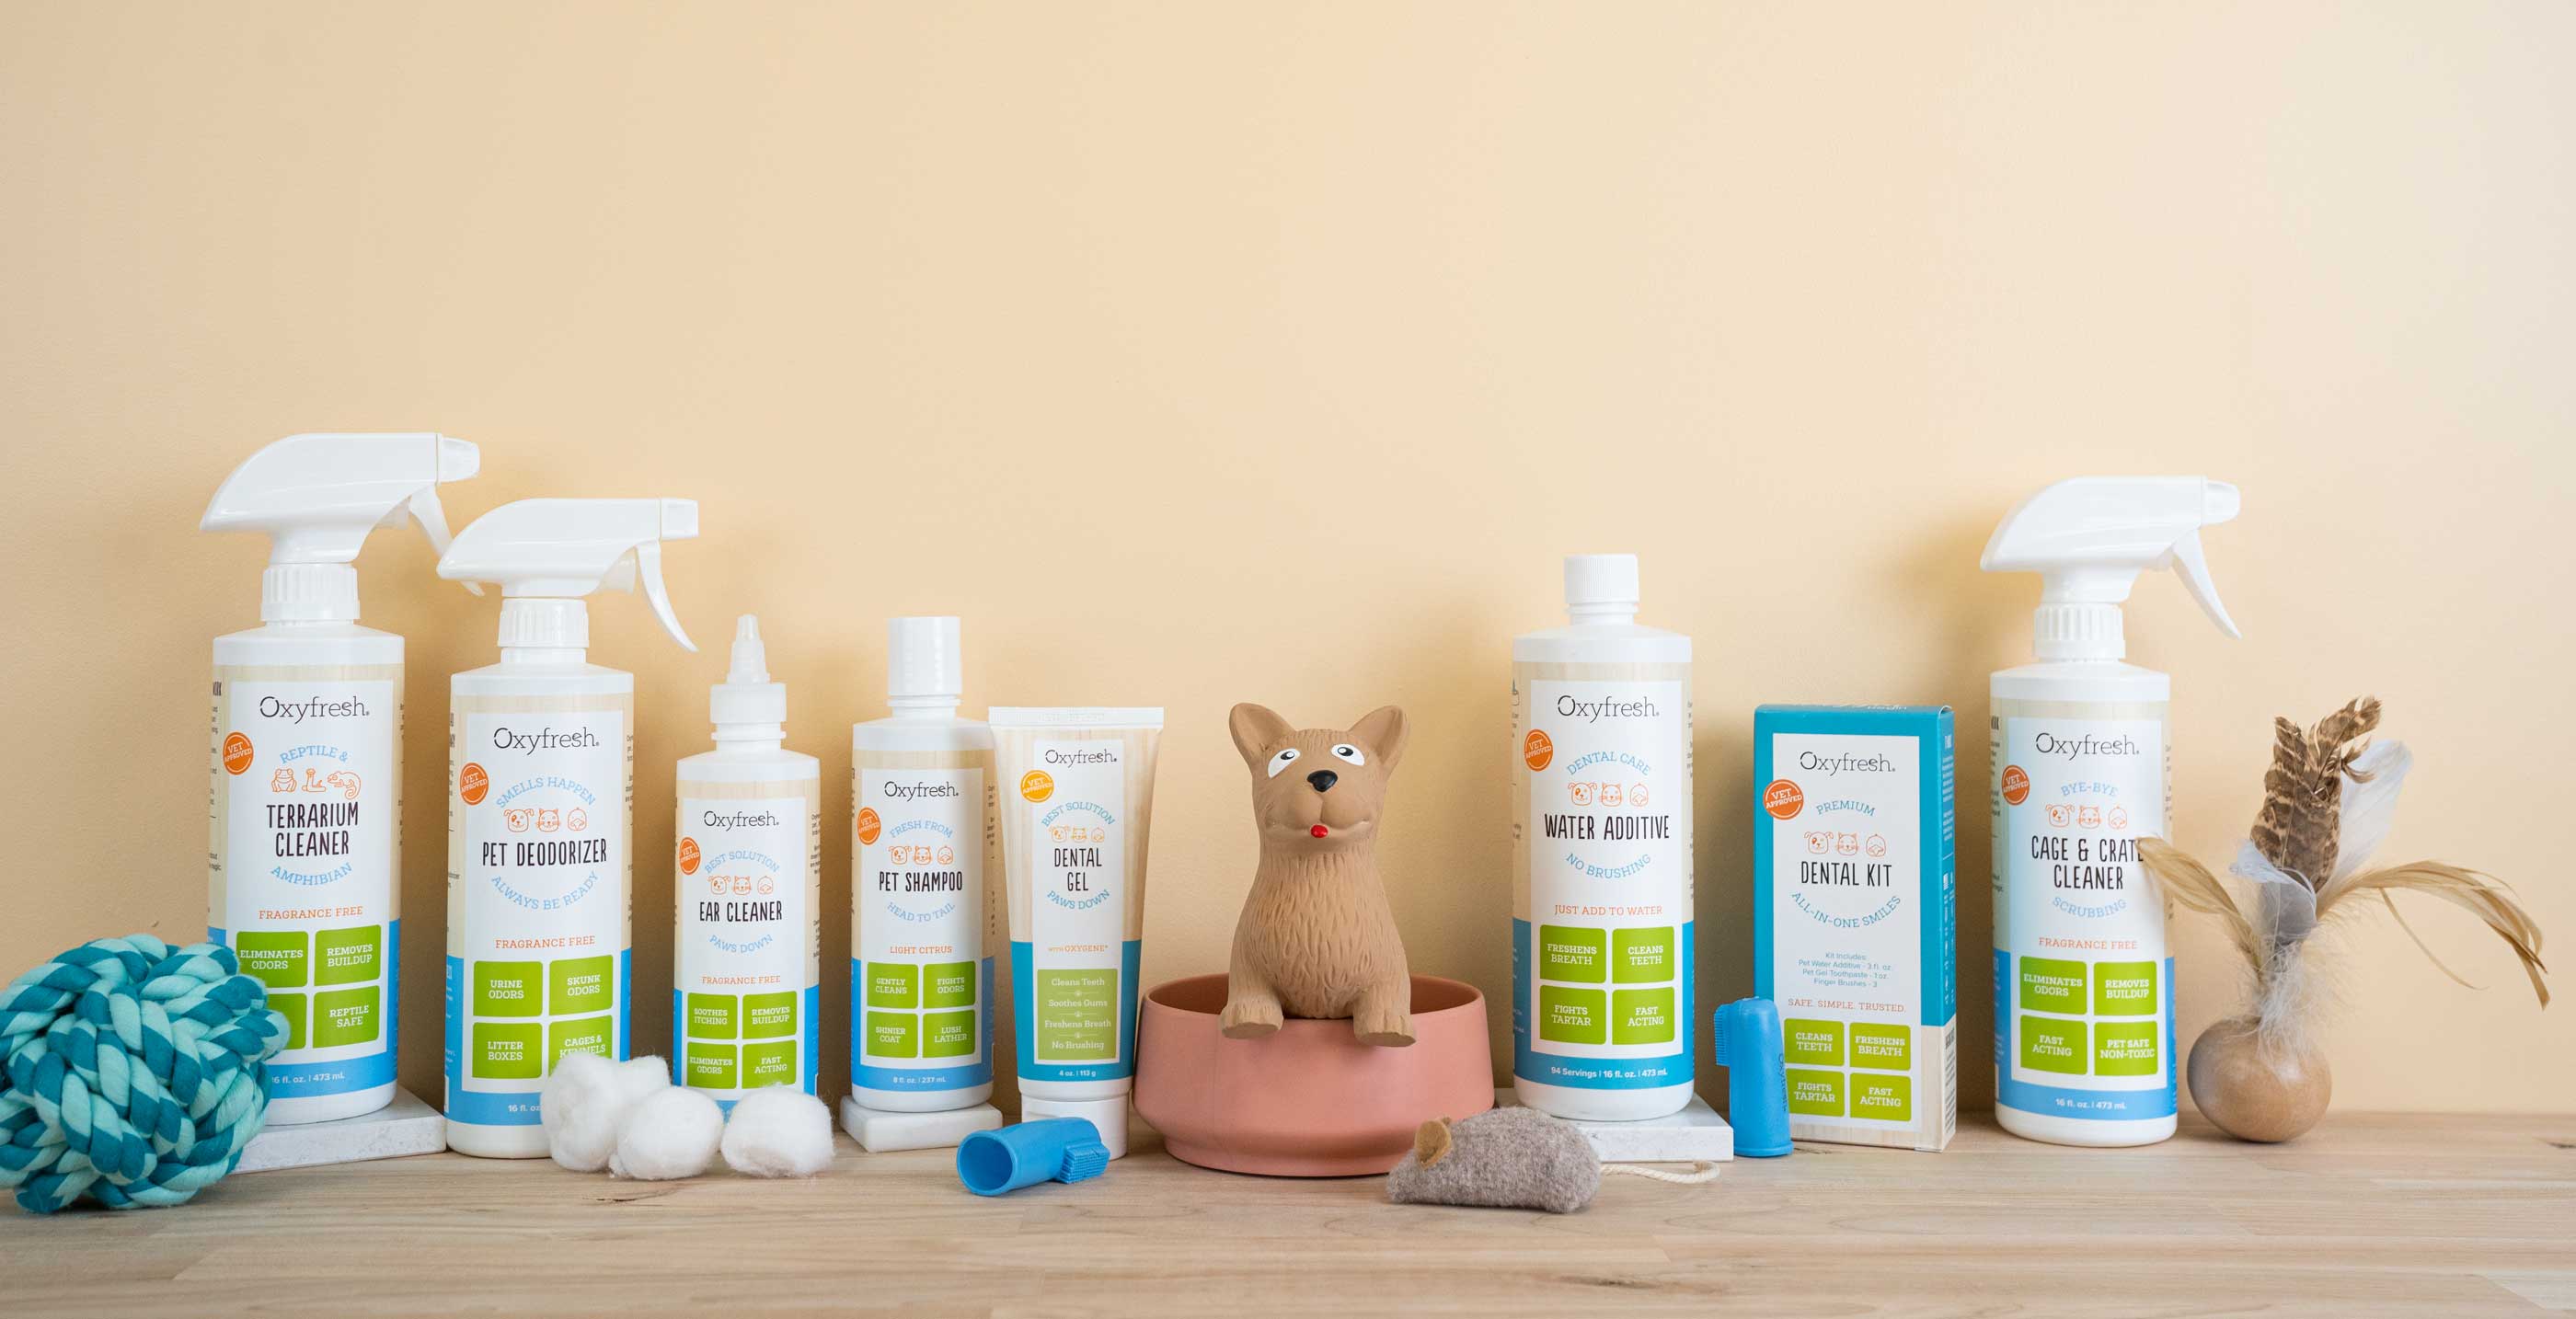 oxyfresh pet line bottles of cleaner, deodorizer, and pet dental care items dispersed with pet toys